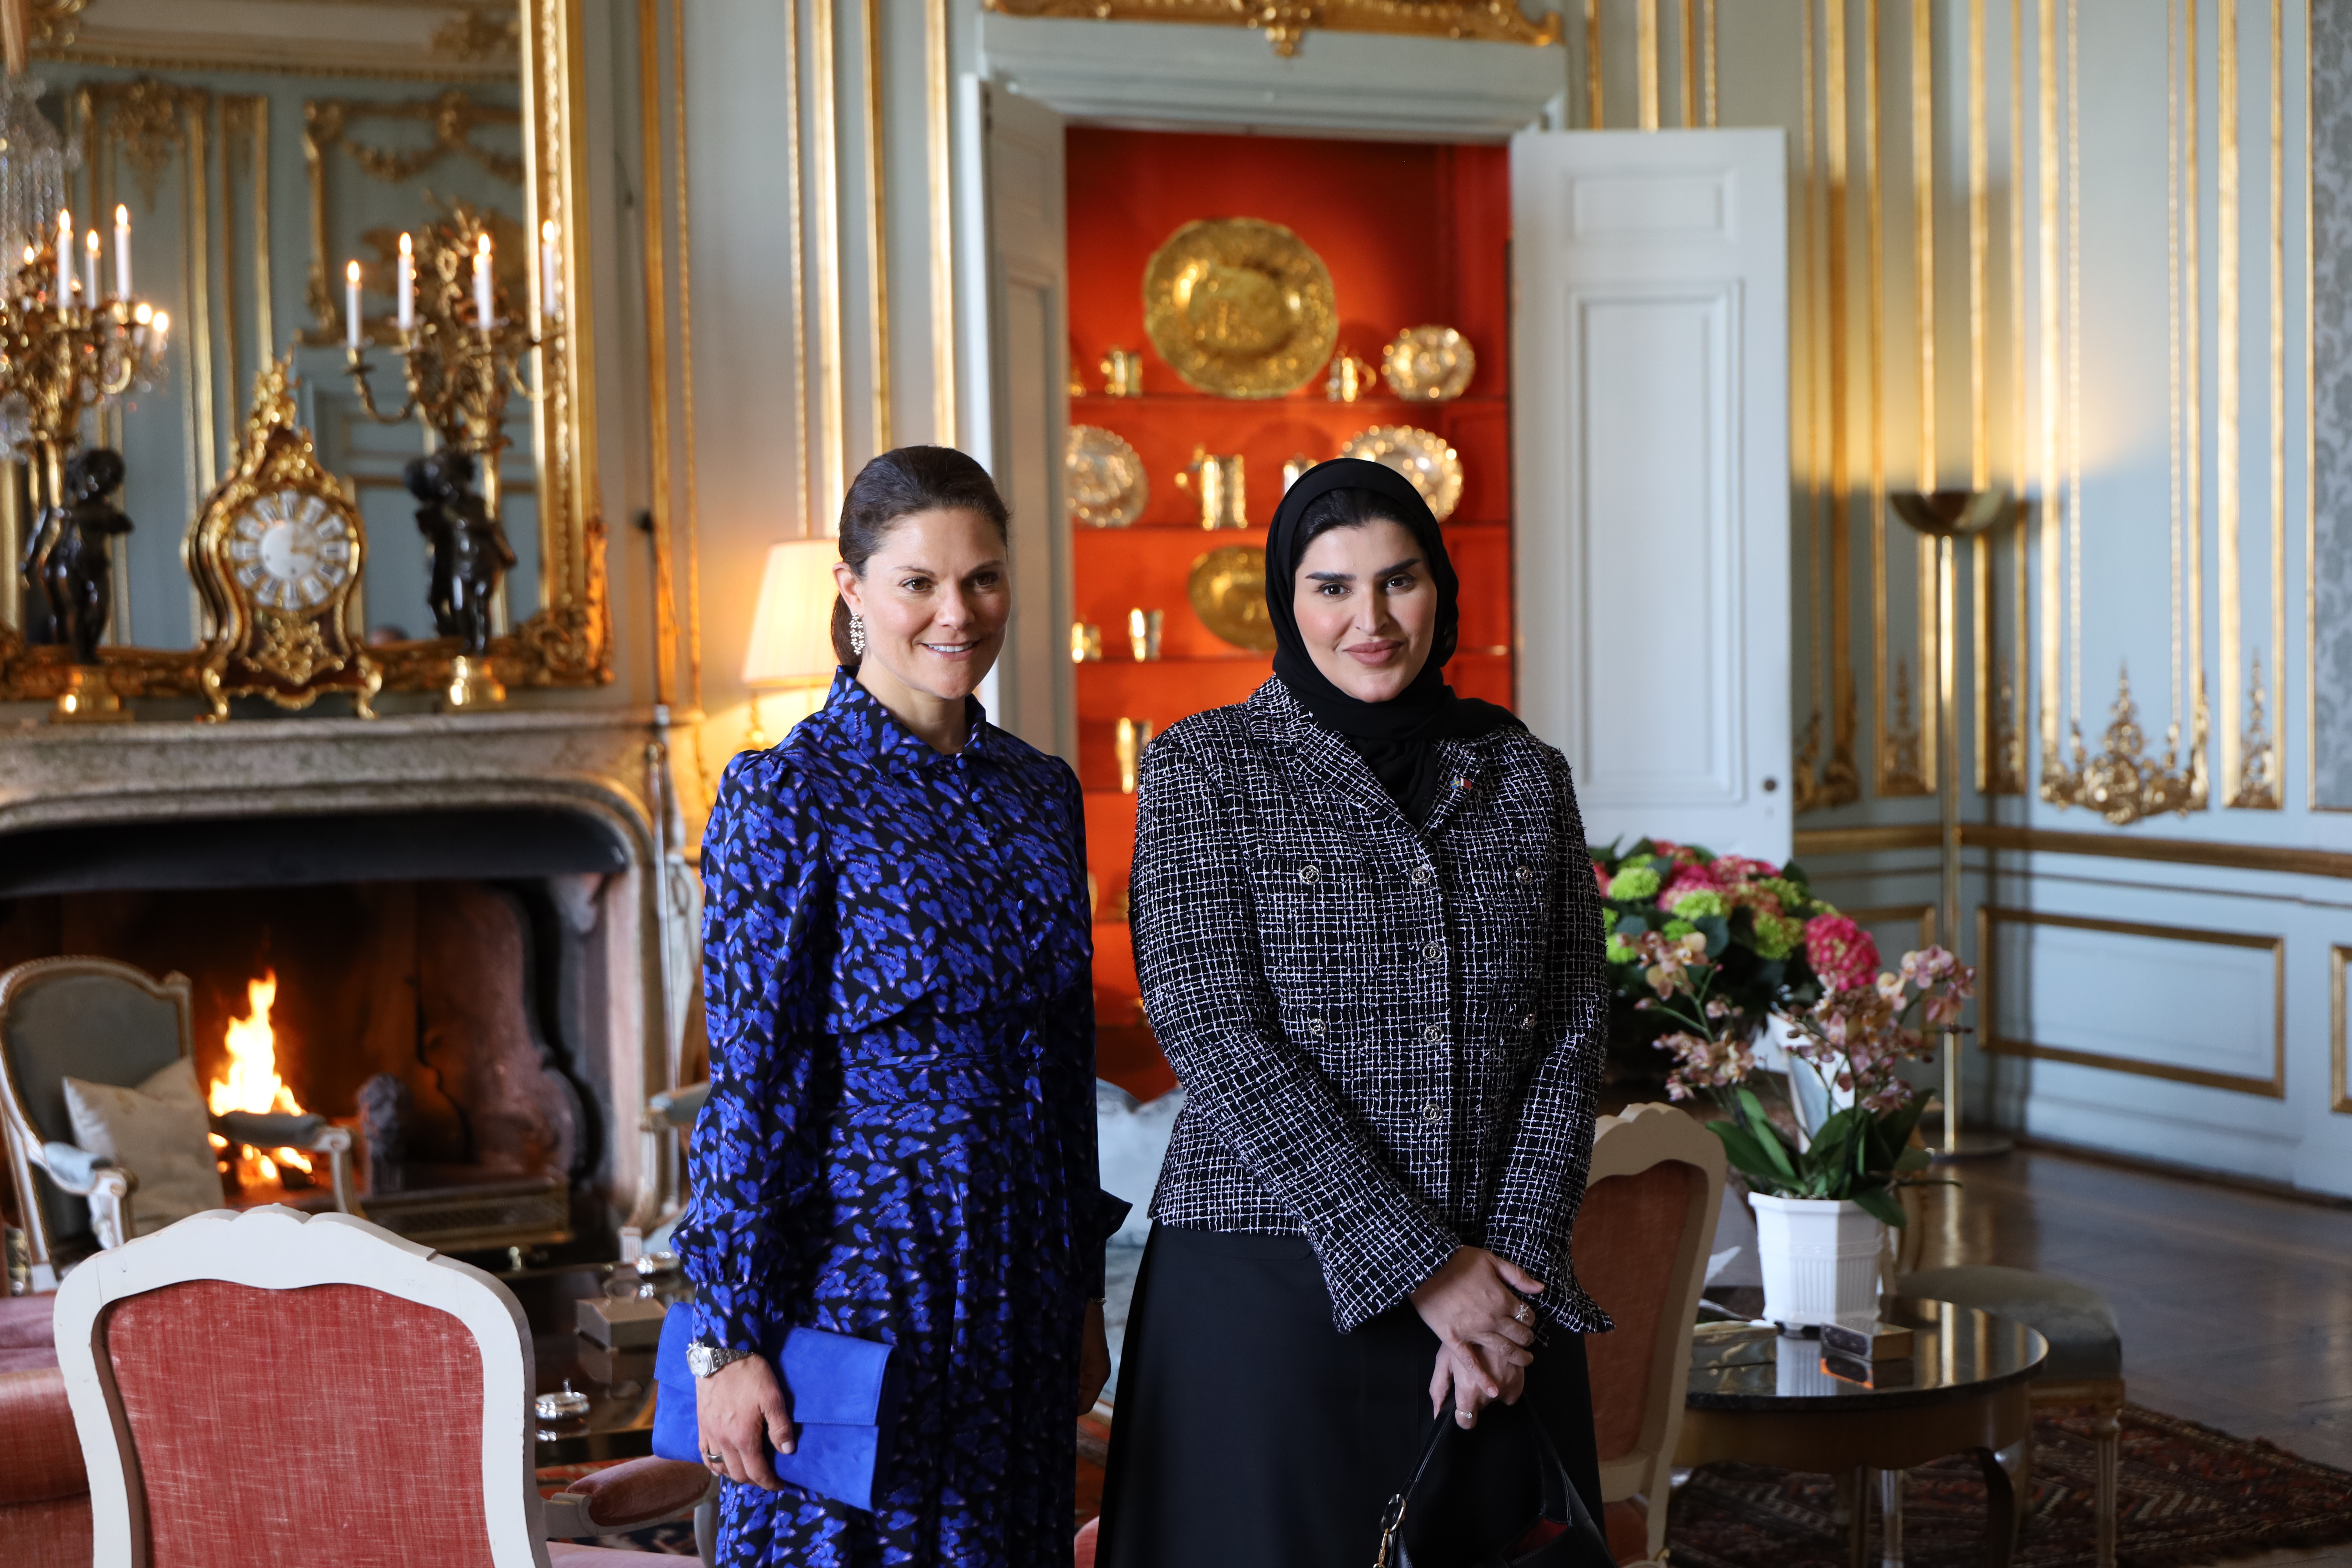 During a visit focused on expediting the exchange of insights and enhancing bilateral cooperation, Her Excellency Mrs. Maryam bint Ali bin Nasser Al-Misnad engages in discussions with the Crown Prince of Sweden